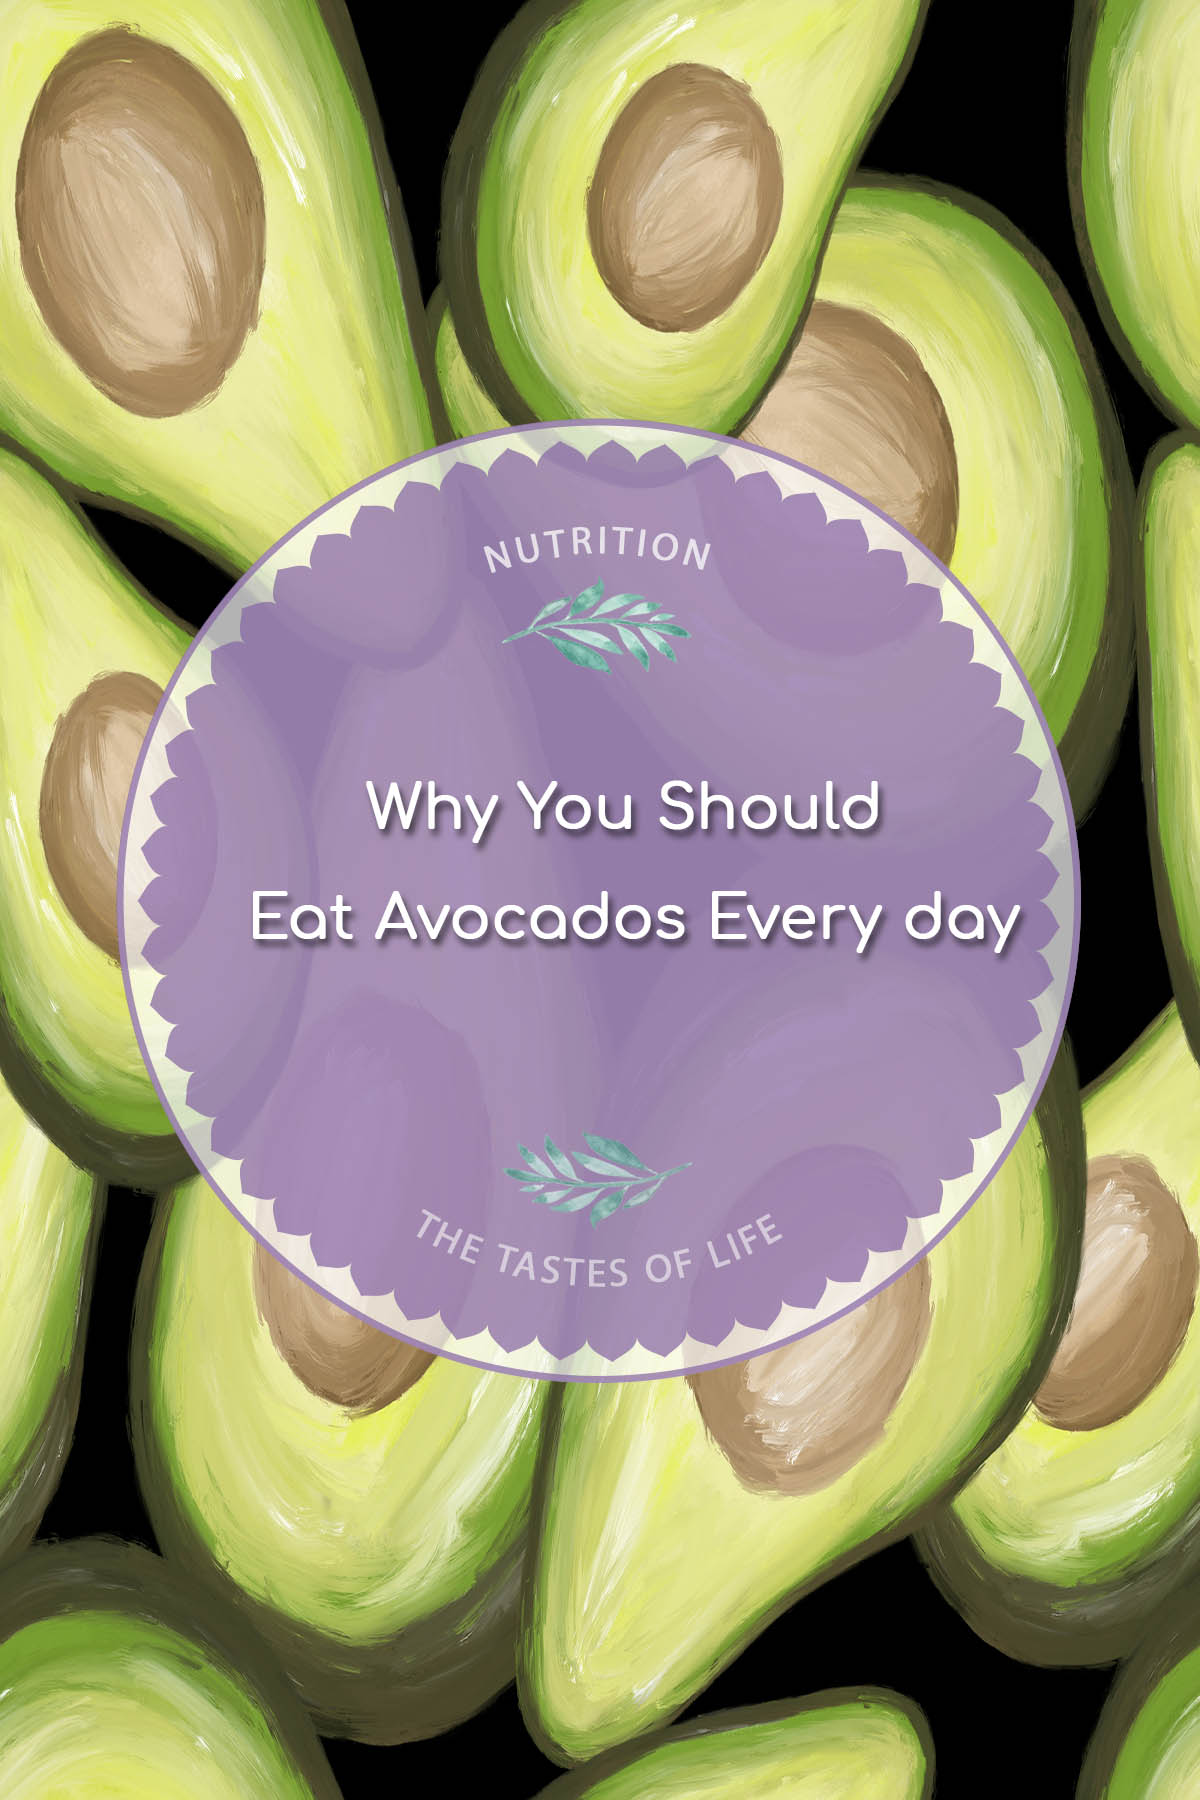 What Should You Eat Everyday – Avocados